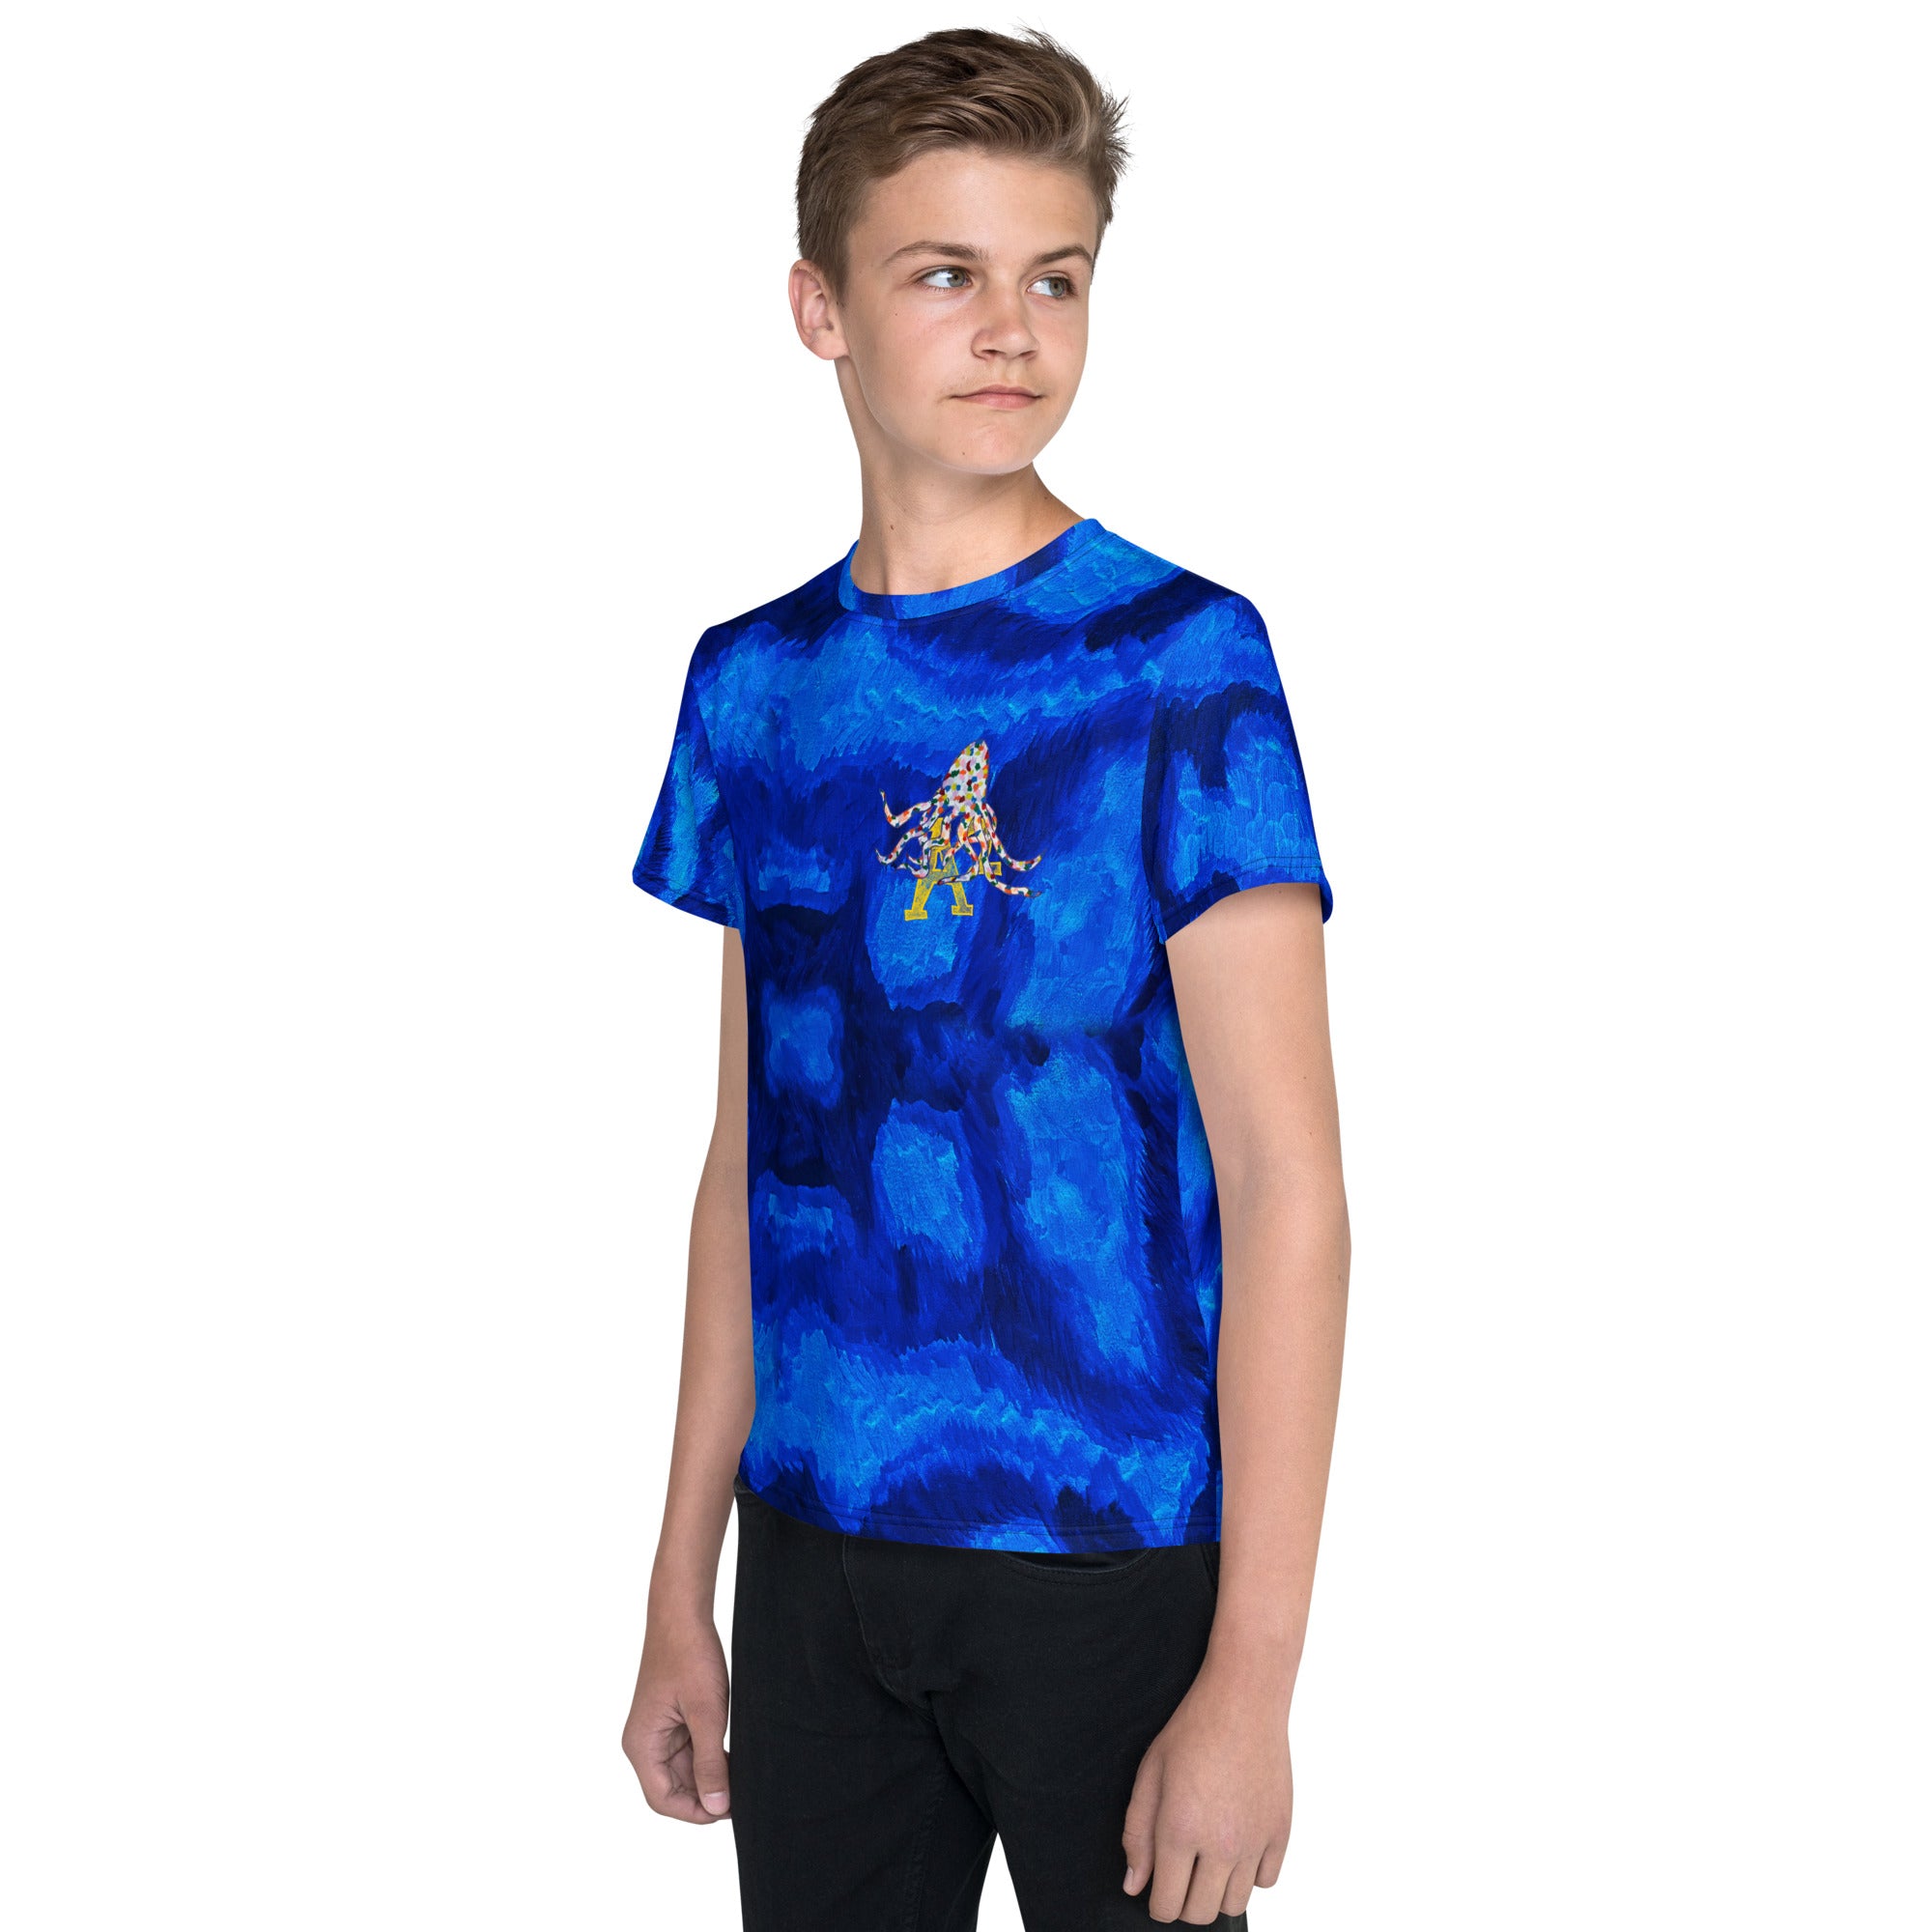 I Octopus A2 Youth crew neck t-shirt